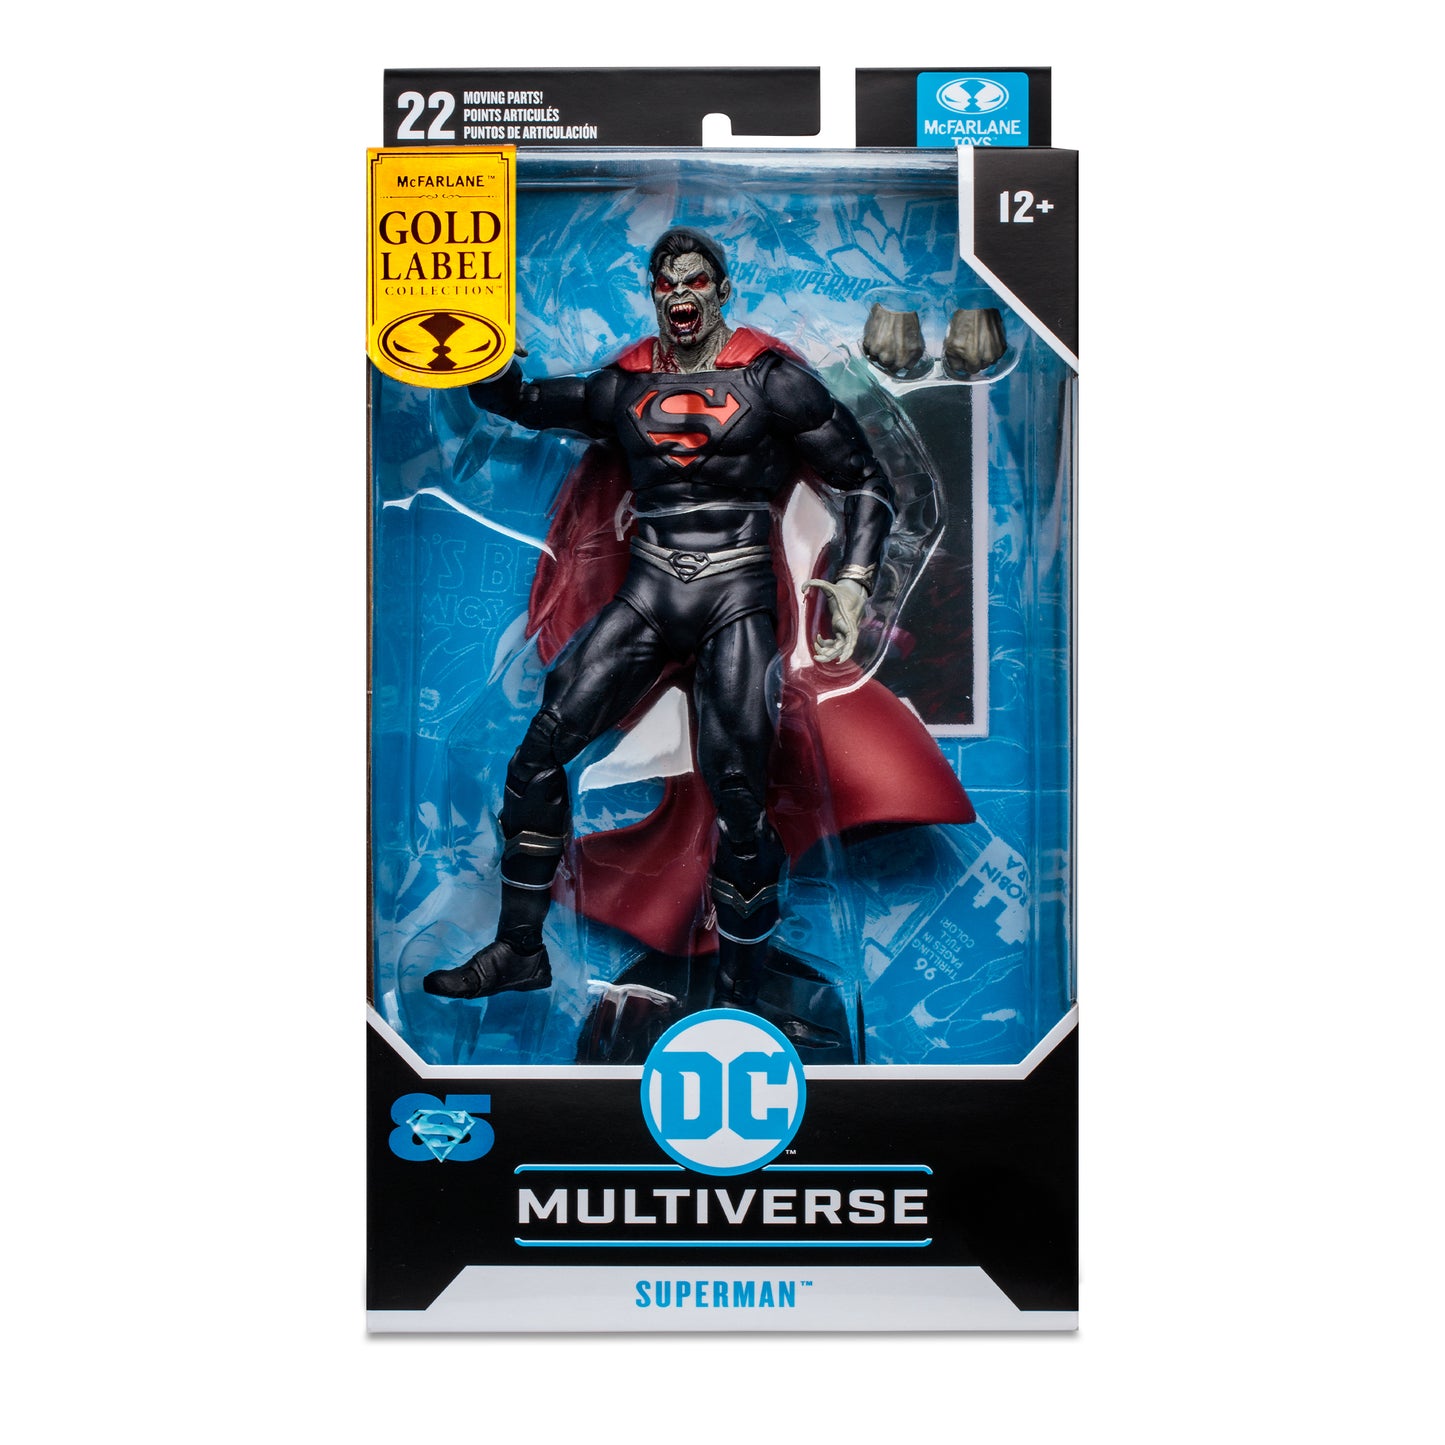 DC Multiverse Vampire Superman (DC vs.Vampires) Gold Label 7-Inch Action Figure in a box - Heretoserveyou